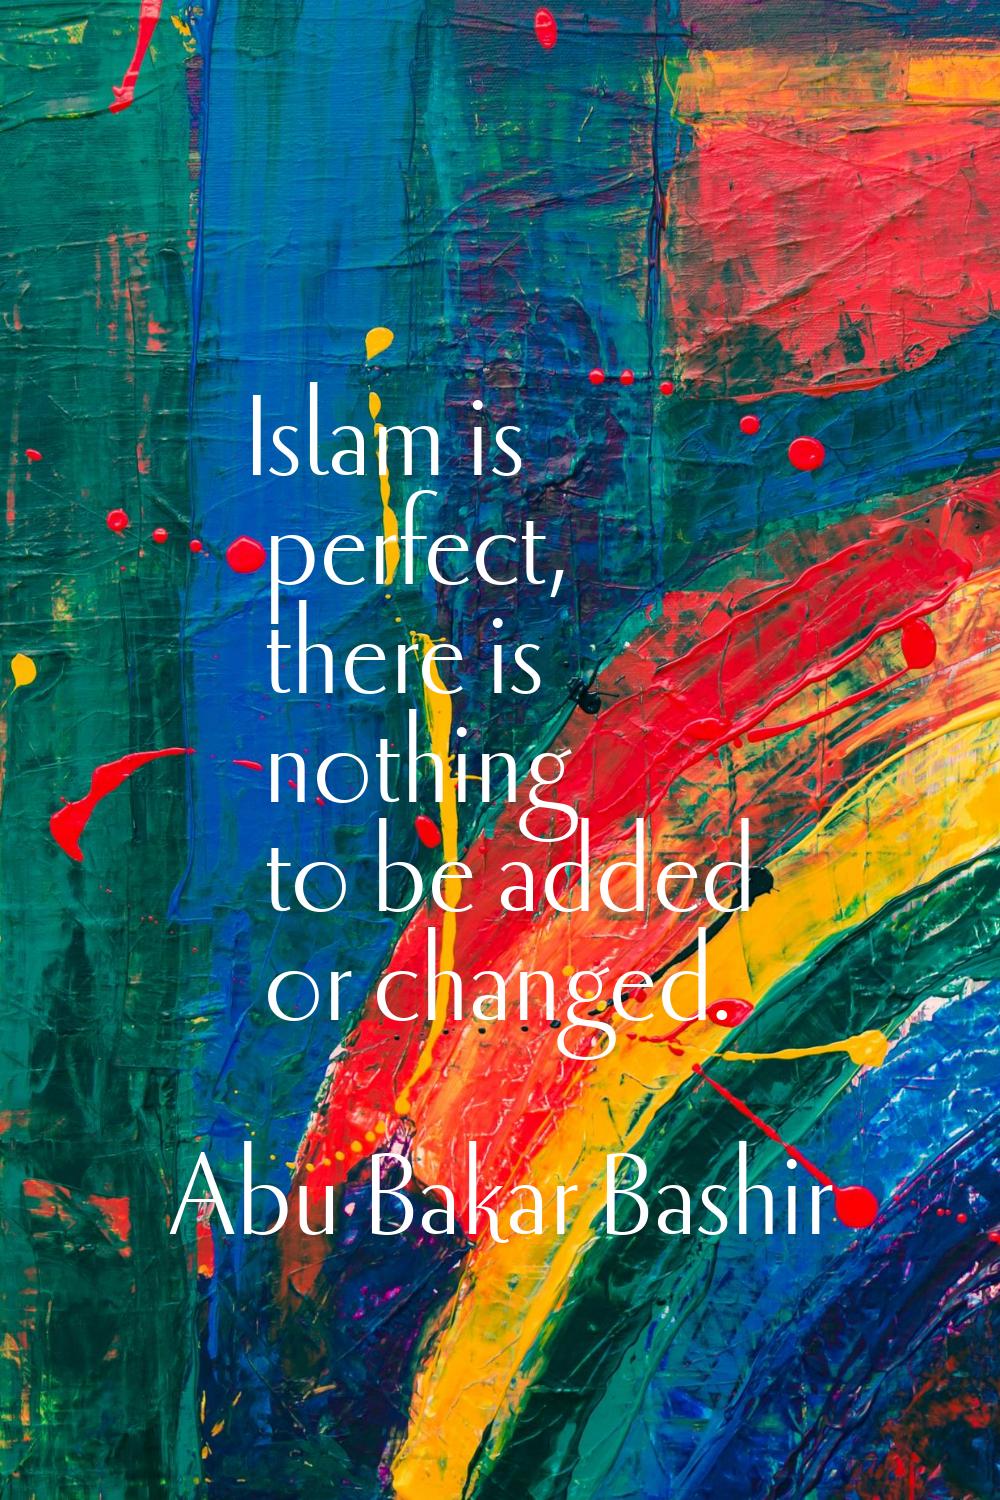 Islam is perfect, there is nothing to be added or changed.